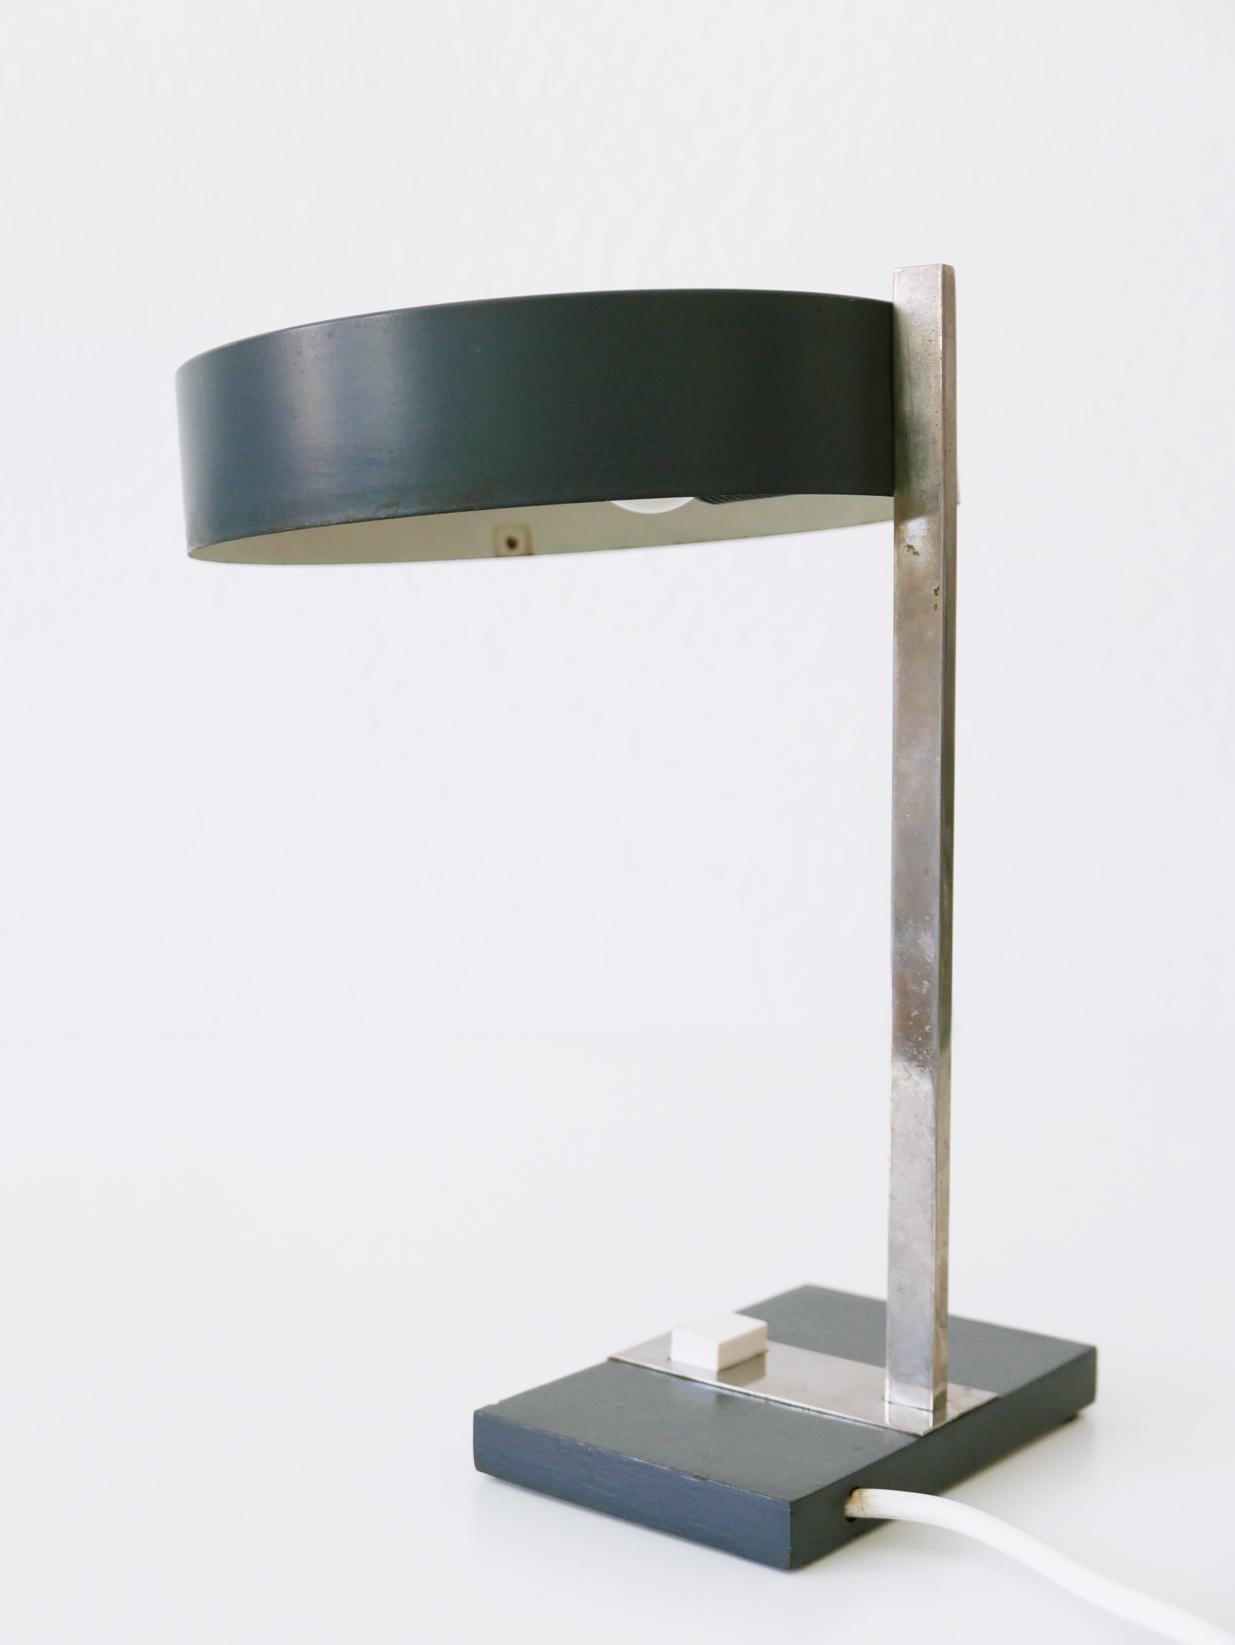 Elegant Mid-Century Modern Table Lamp or Desk Light by Hillebrand, 1960s Germany In Good Condition For Sale In Munich, DE